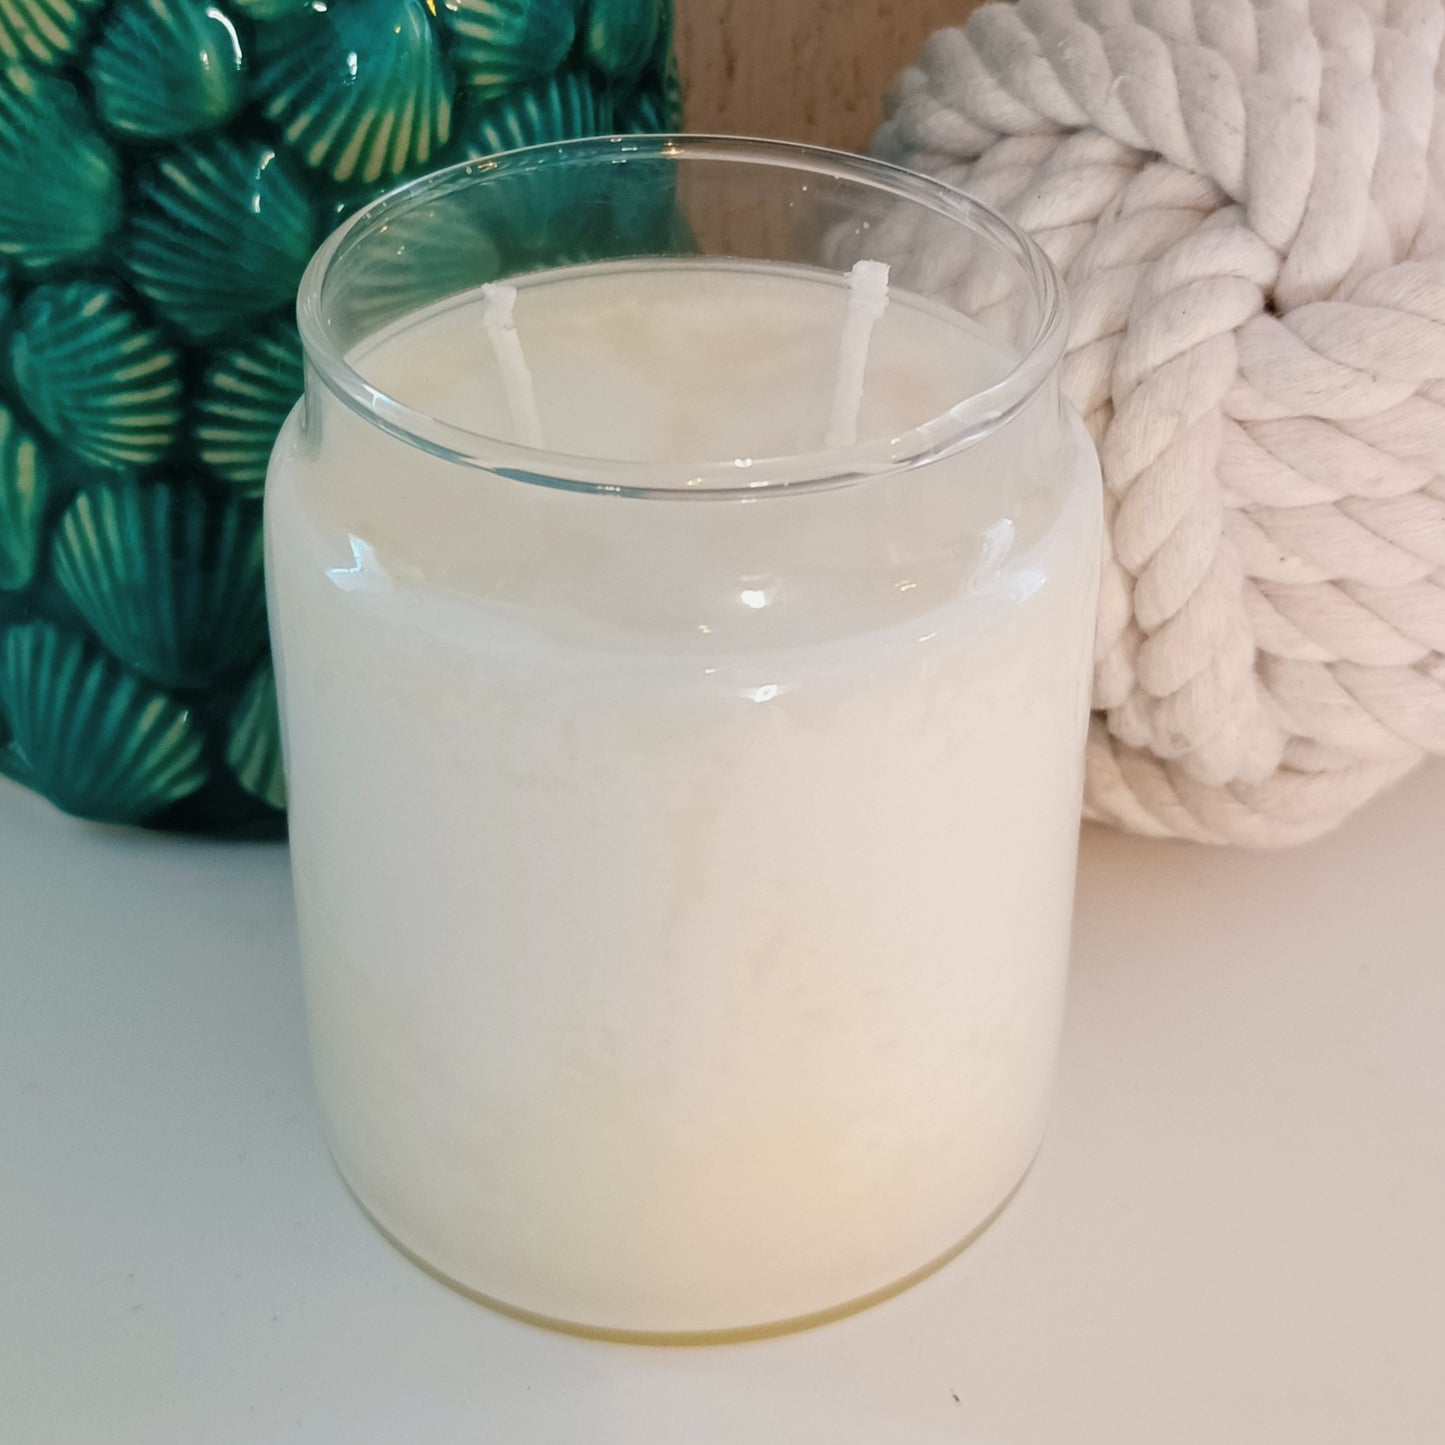 Tobacco and Bay Leaf Soy Candle